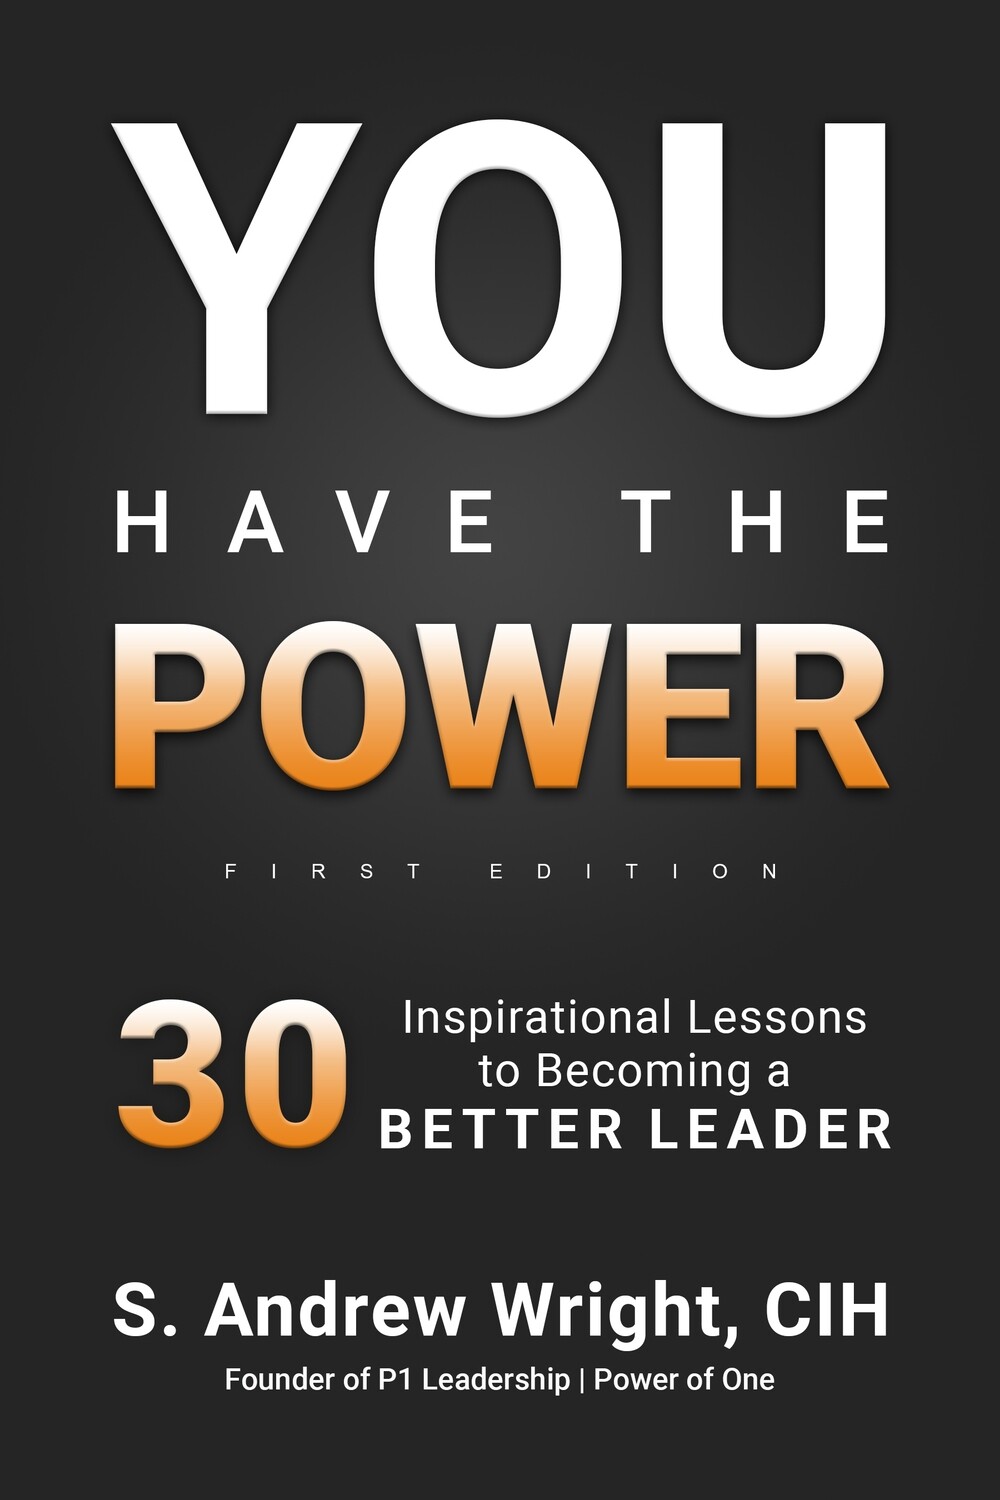 You Have the Power, First Edition Hard Cover